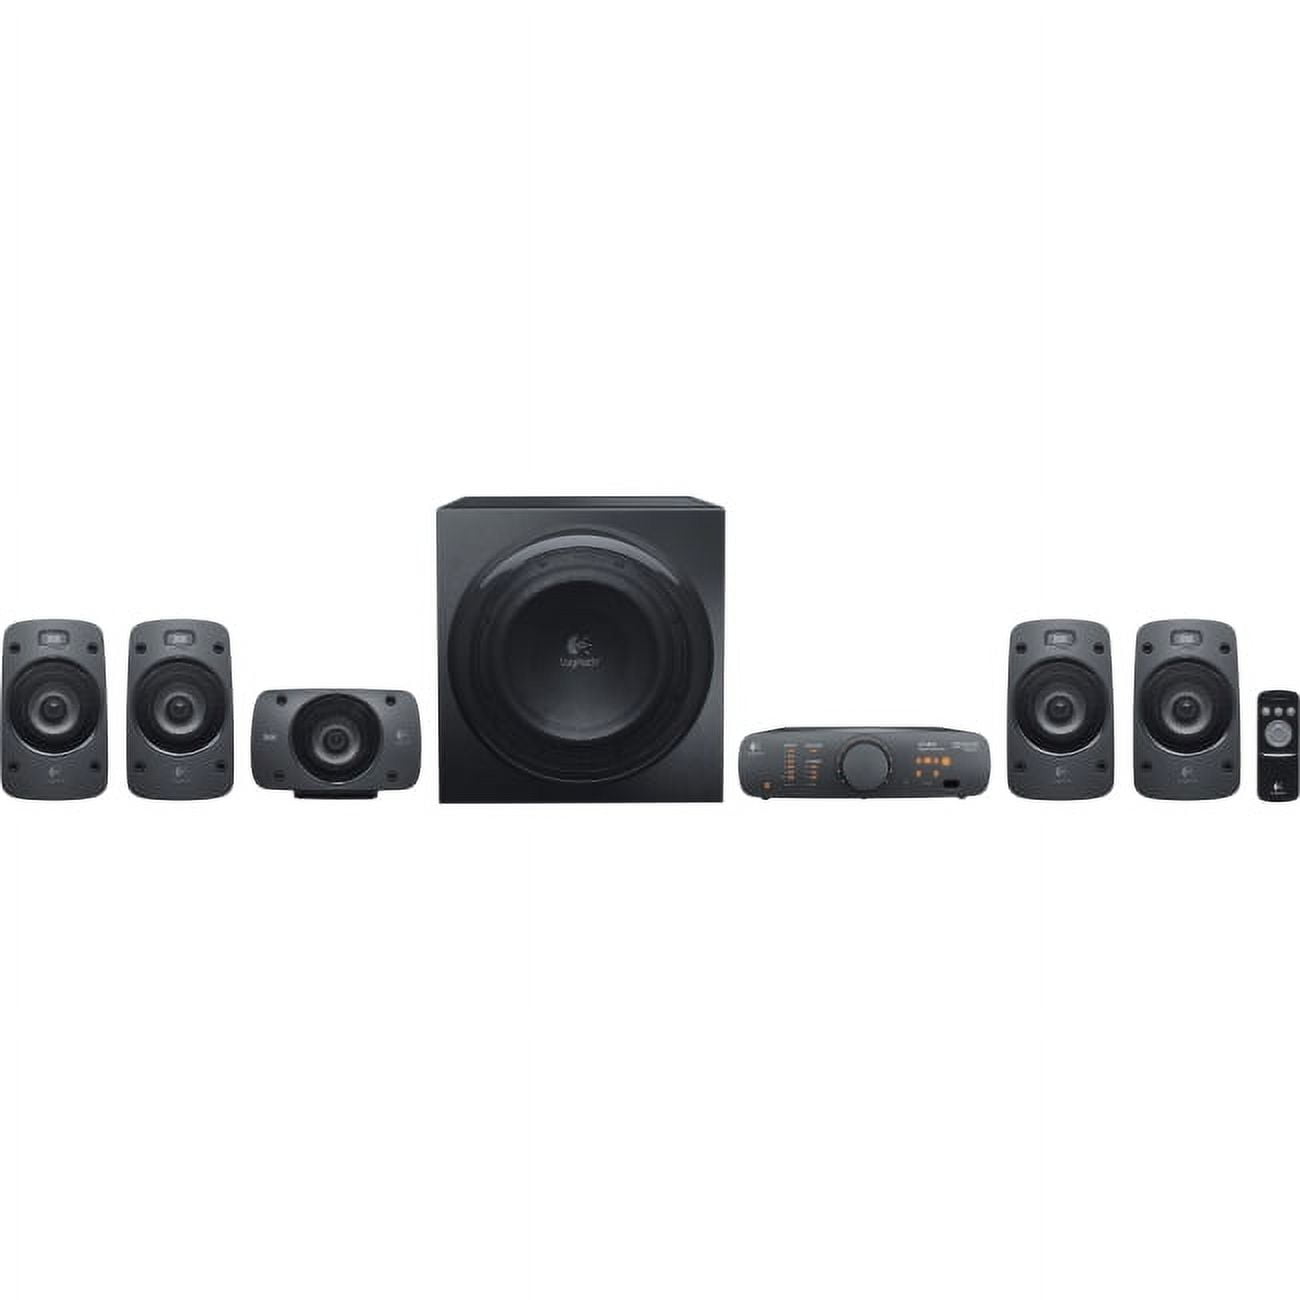 Logitech Z906 5.1 Speaker System - 500 W RMS - DTS, Dolby Digital, 3D Sound  - iPod Supported 